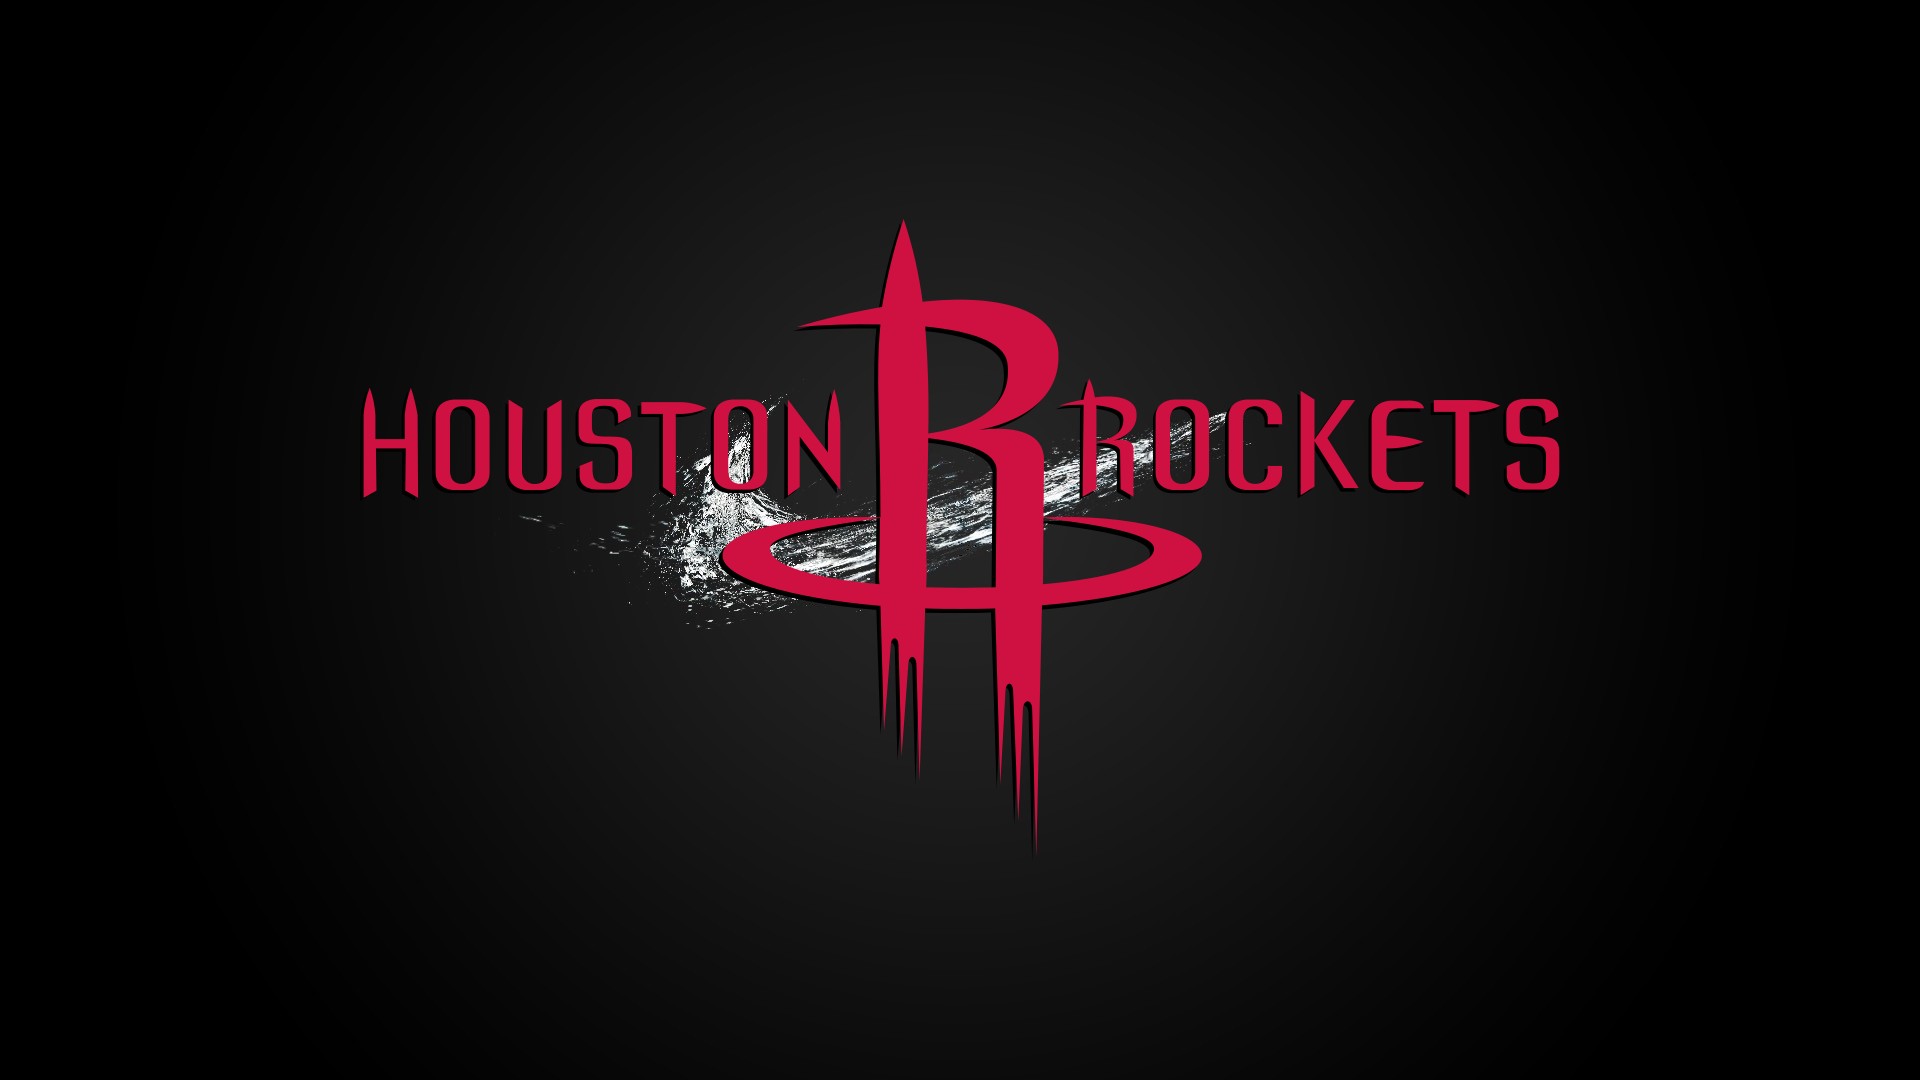 Rockets Wallpaper For Mac Backgrounds with image dimensions 1920x1080 pixel. You can make this wallpaper for your Desktop Computer Backgrounds, Windows or Mac Screensavers, iPhone Lock screen, Tablet or Android and another Mobile Phone device